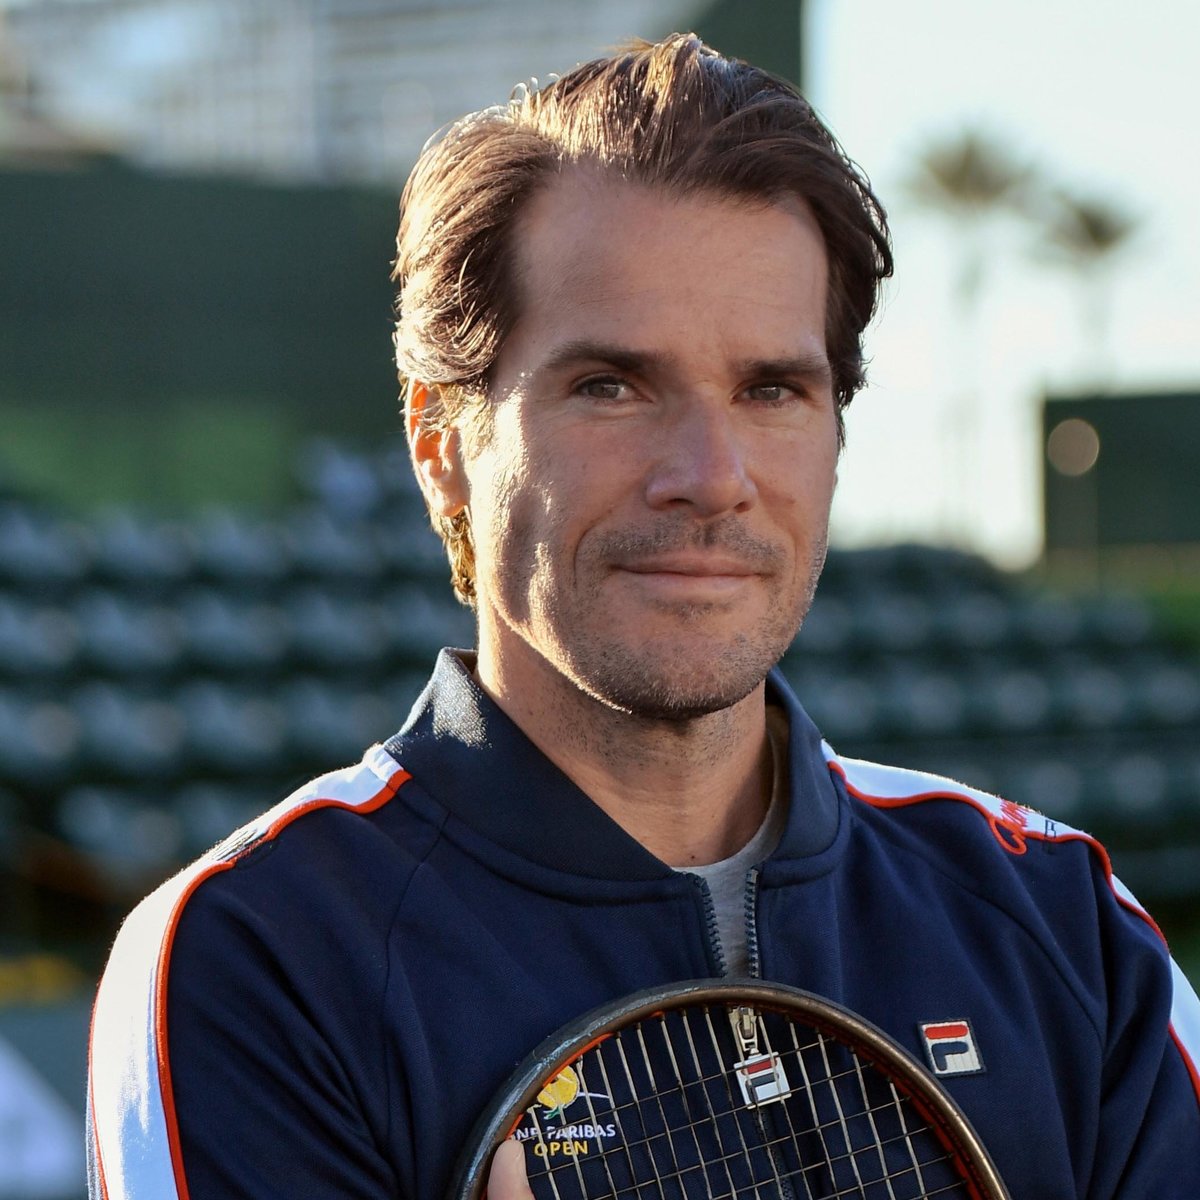 Charlie feat. Tommy Haas